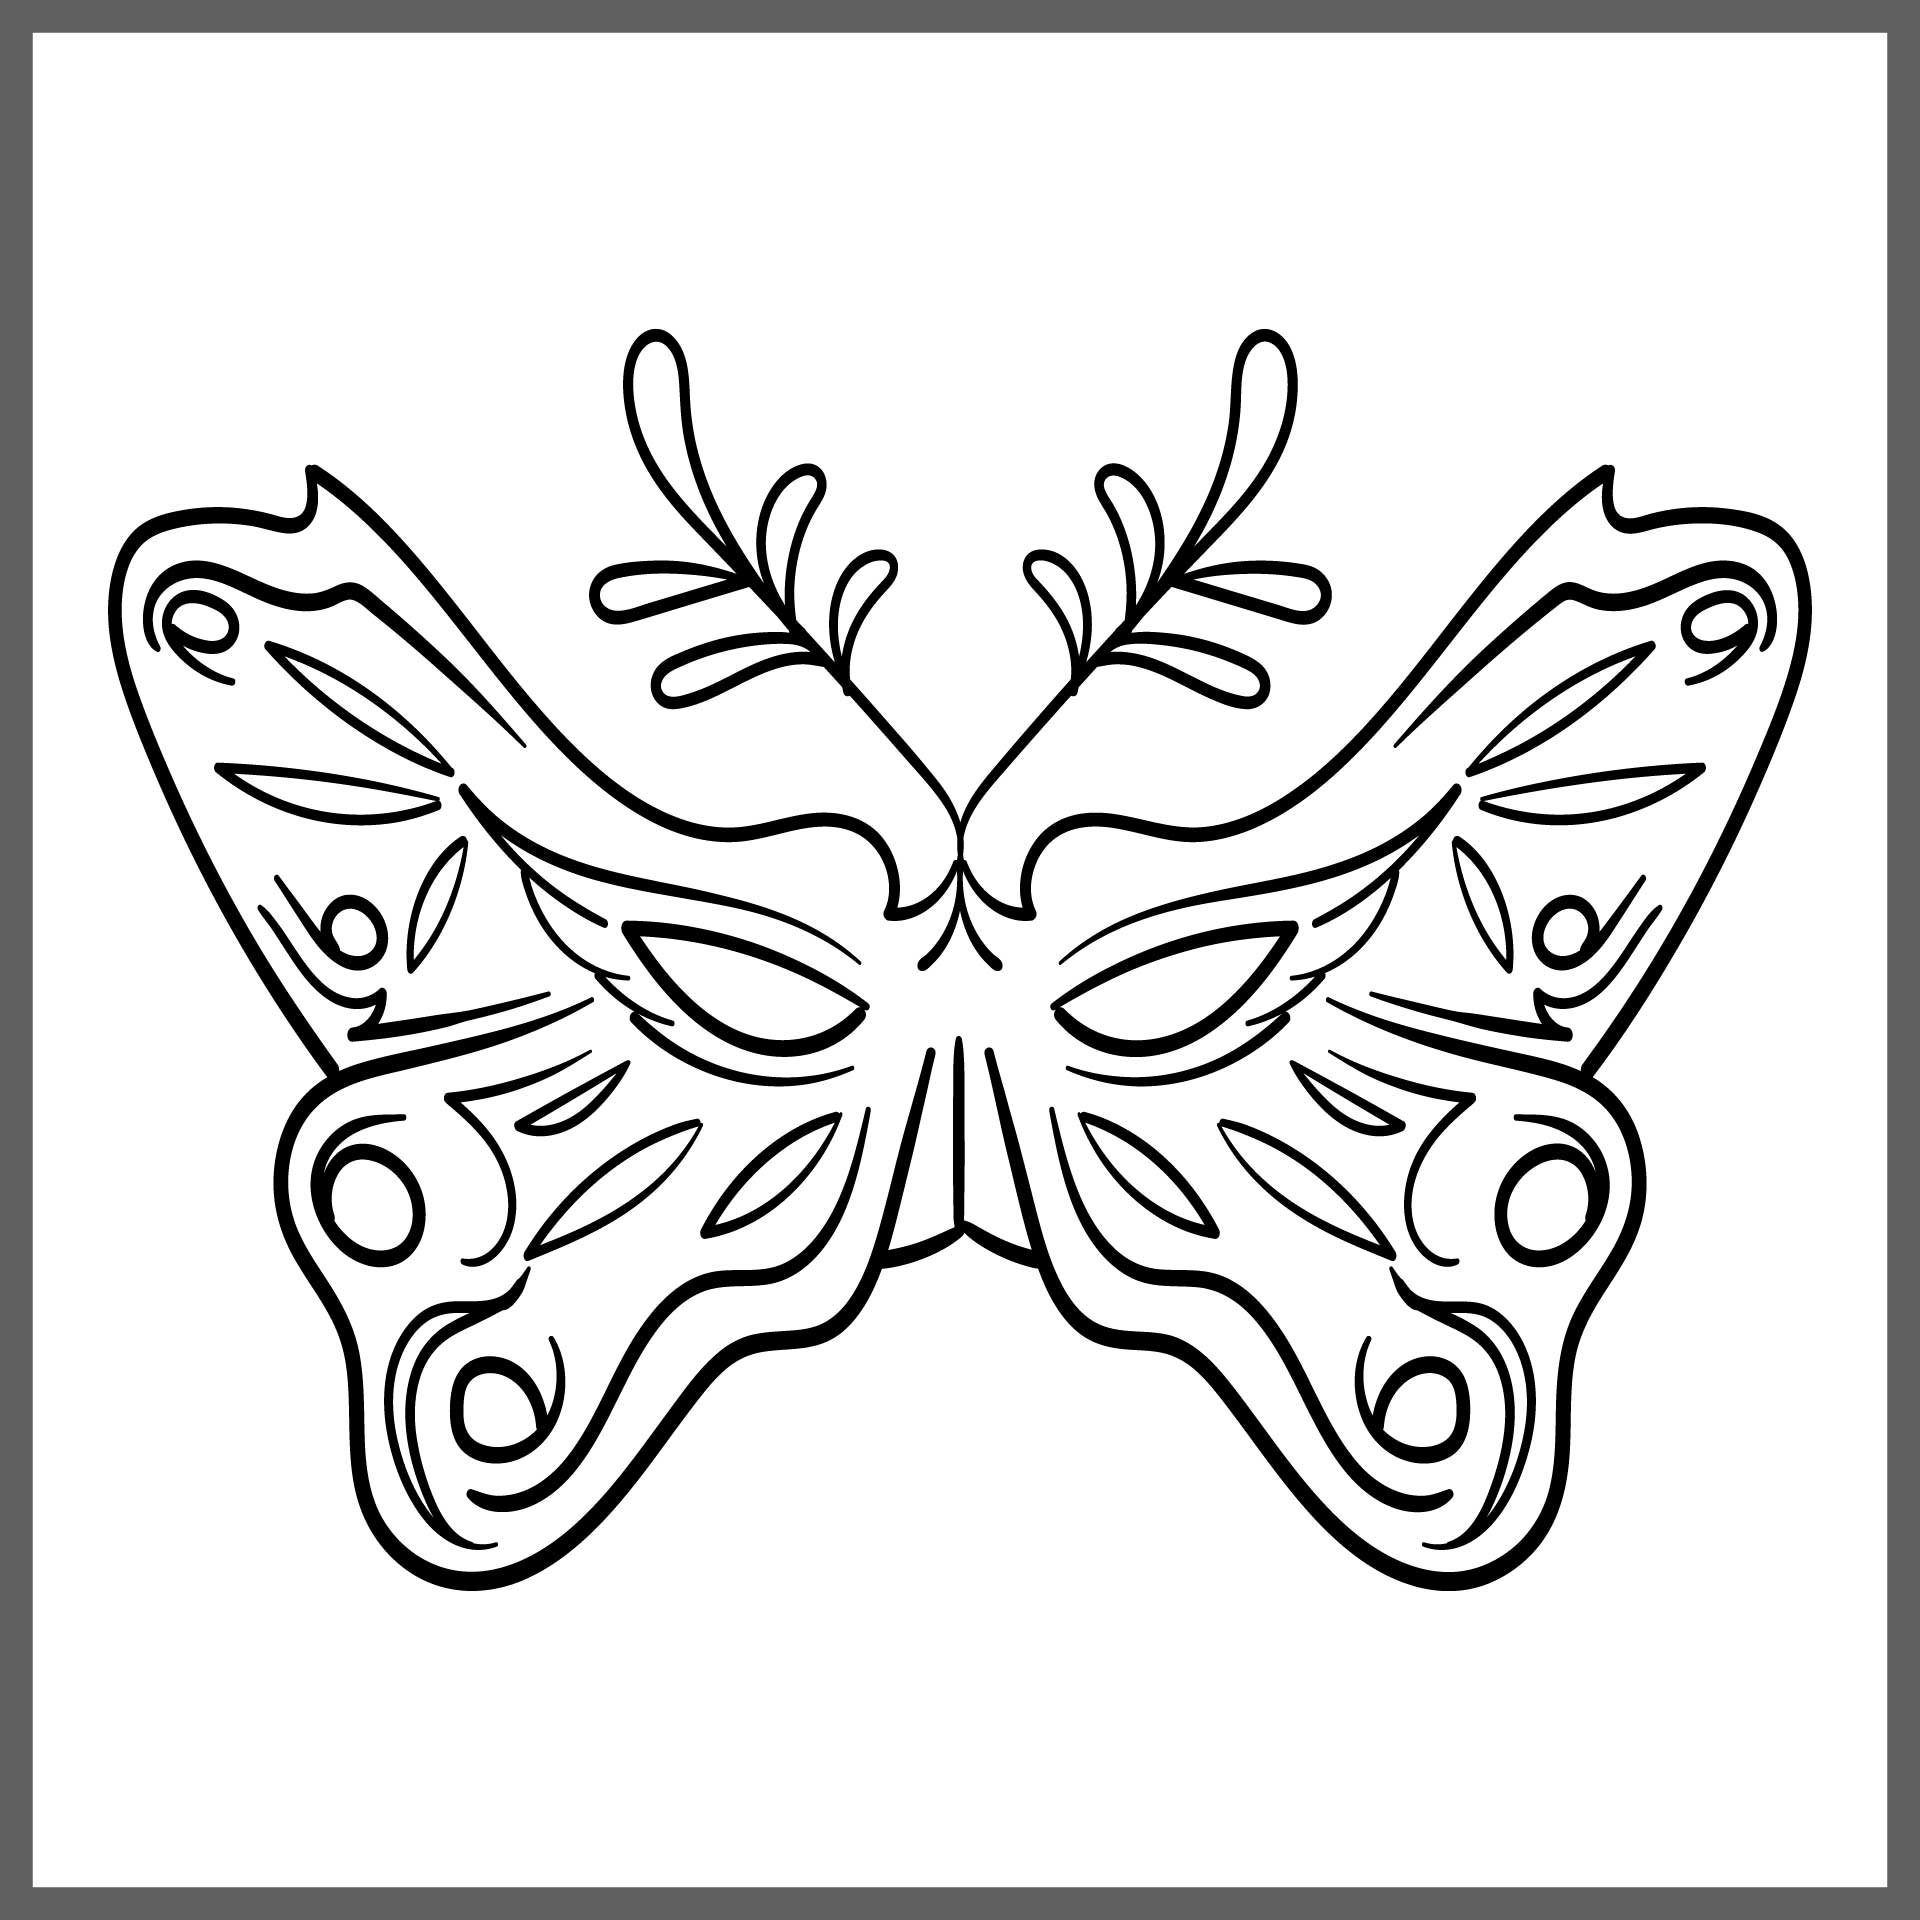 7 Best Images of Butterfly Mask Printable Coloring Pages - Printable ...